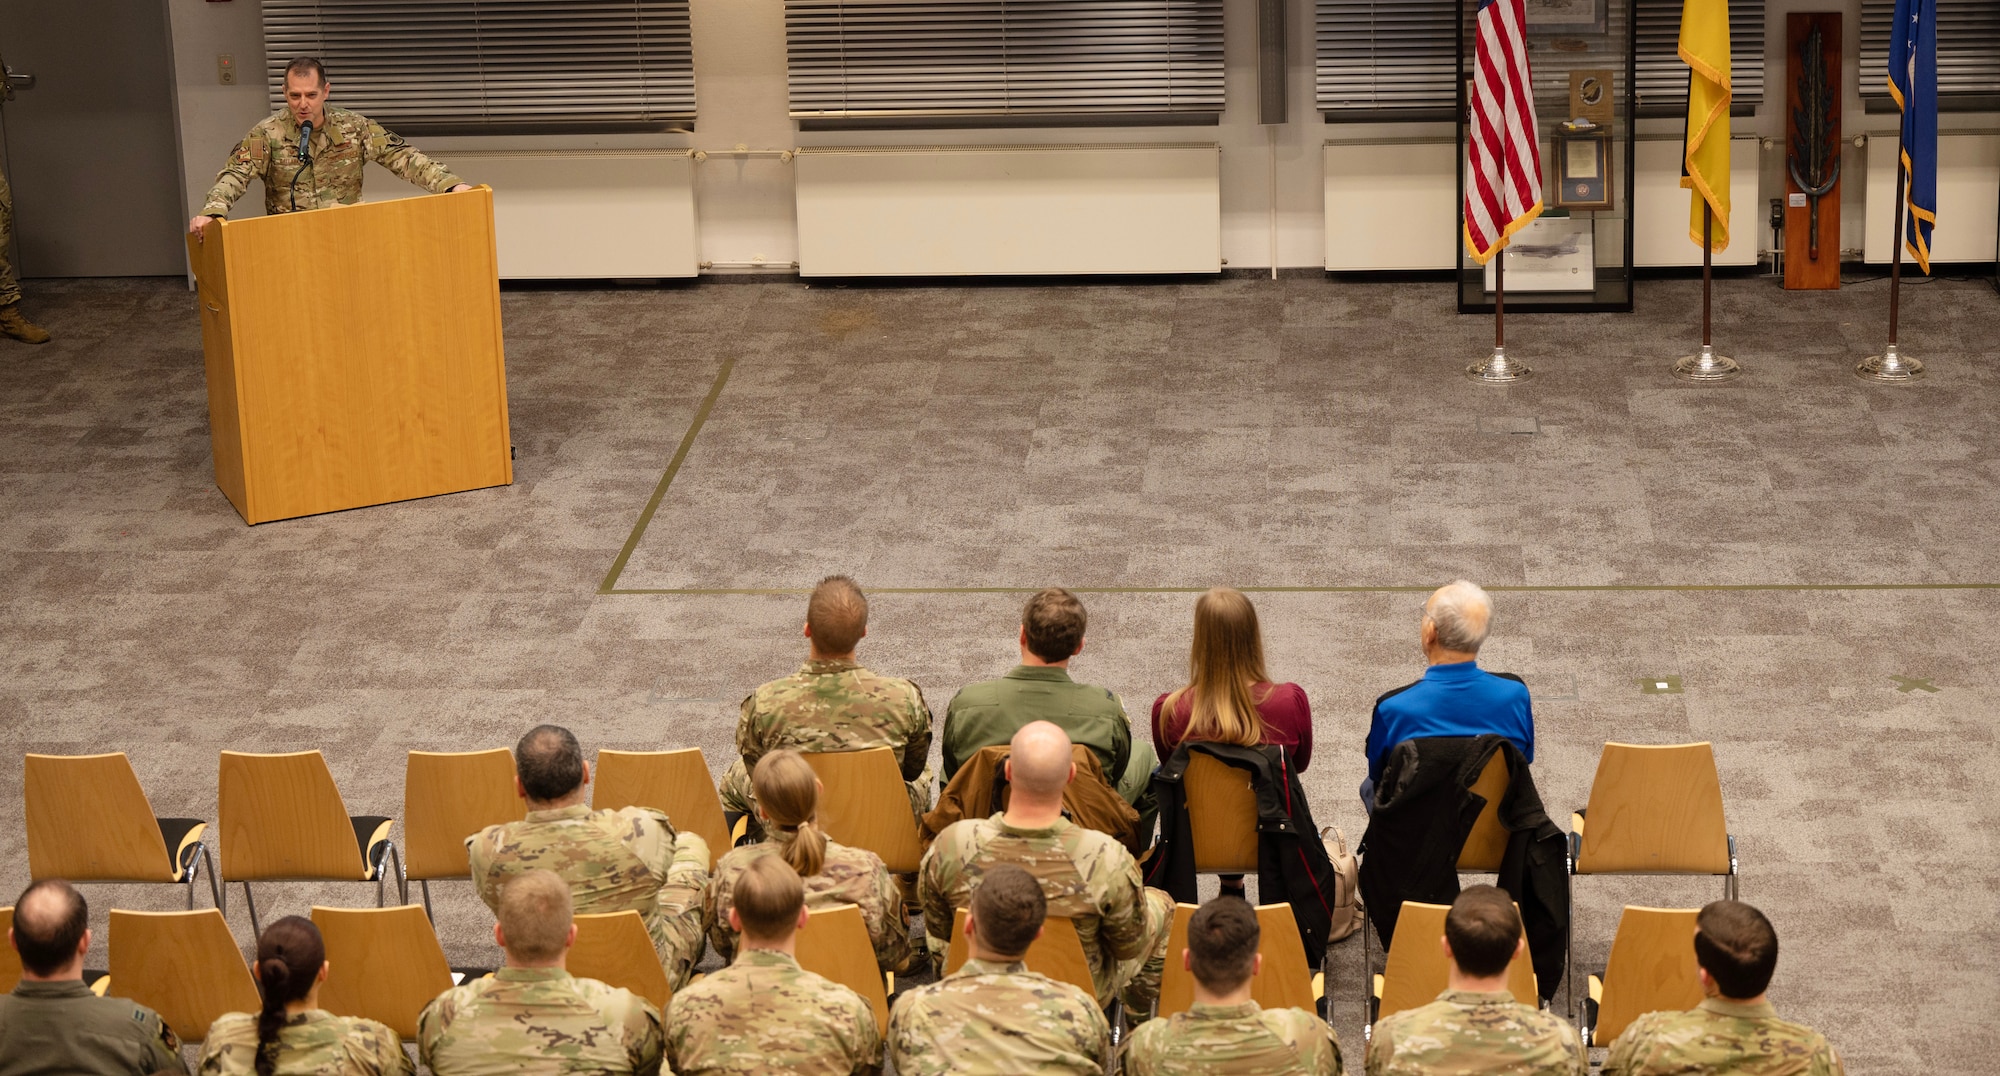 U.S. Air Force Col. Bryan T. Callahan, 435th Air Ground Operations Wing commander, speaks during an award ceremony at Ramstein Air Base, Germany, Feb. 3, 2023.